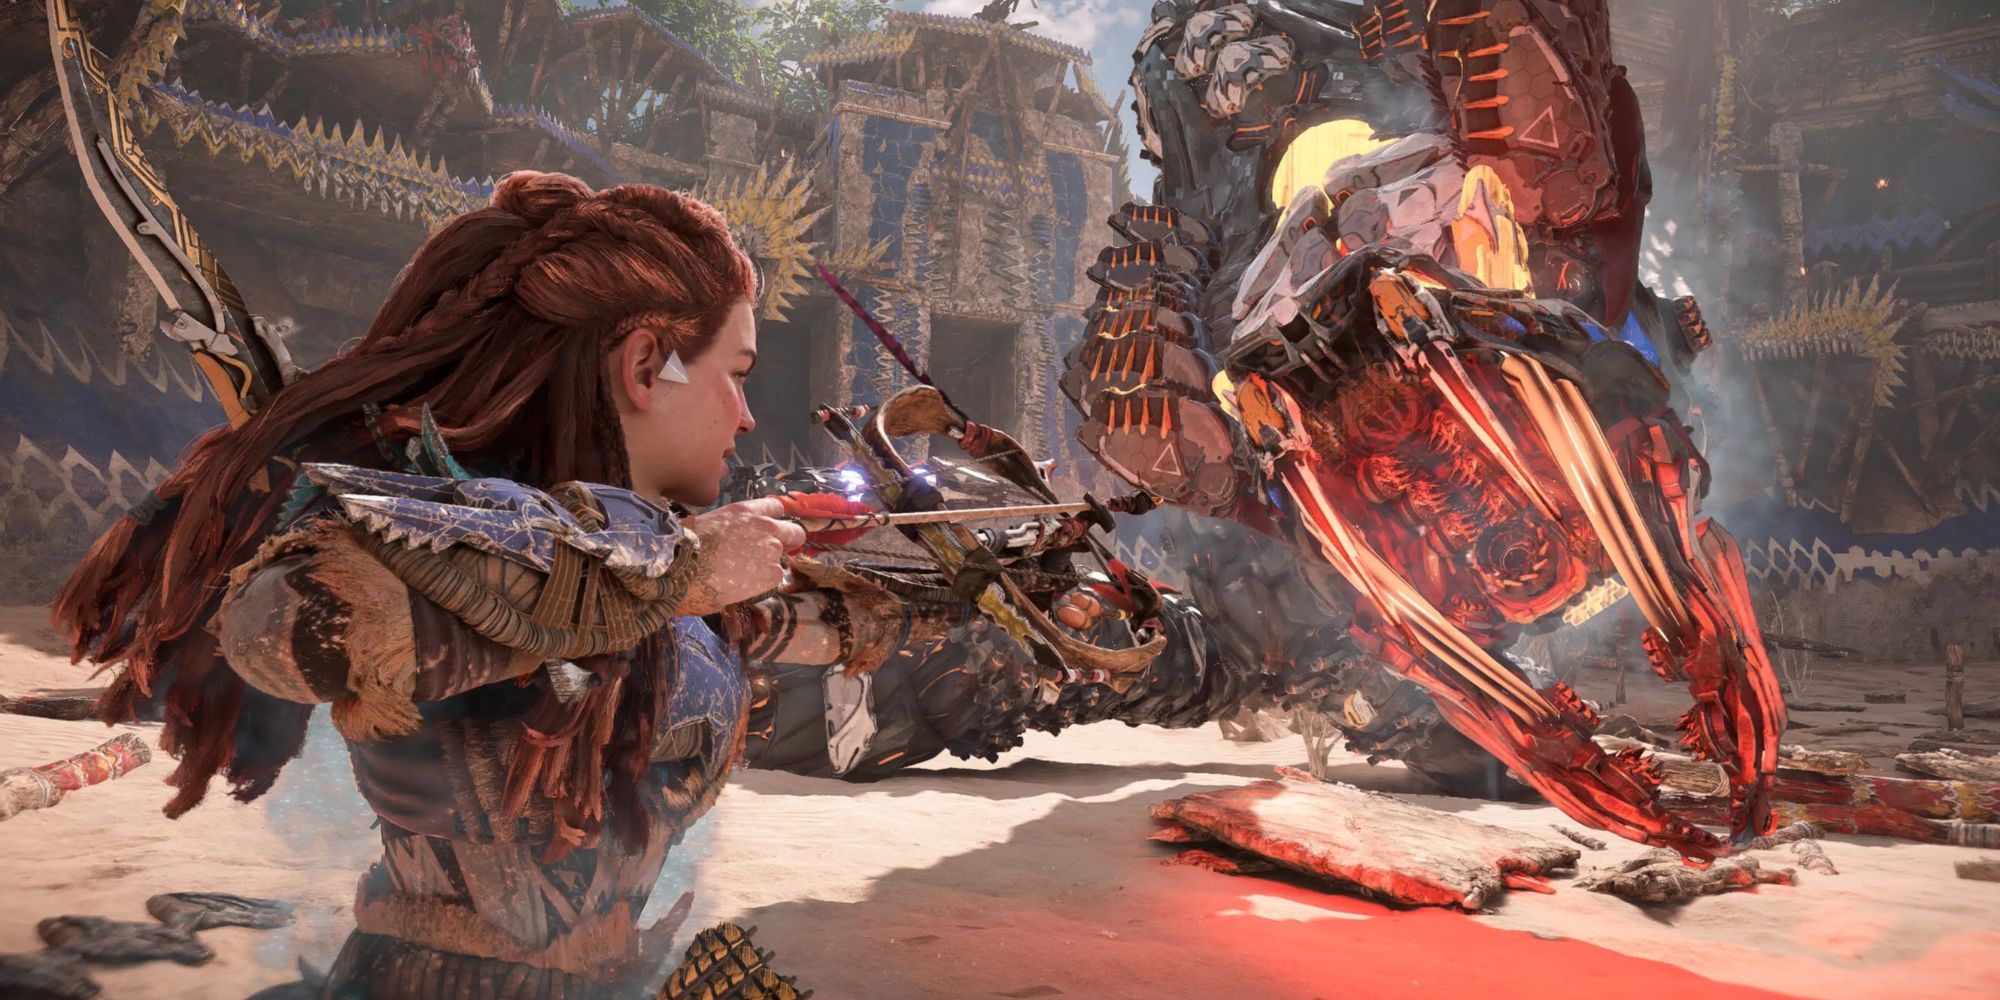 Aloy fights a snake-like machine in Horizon Forbidden West